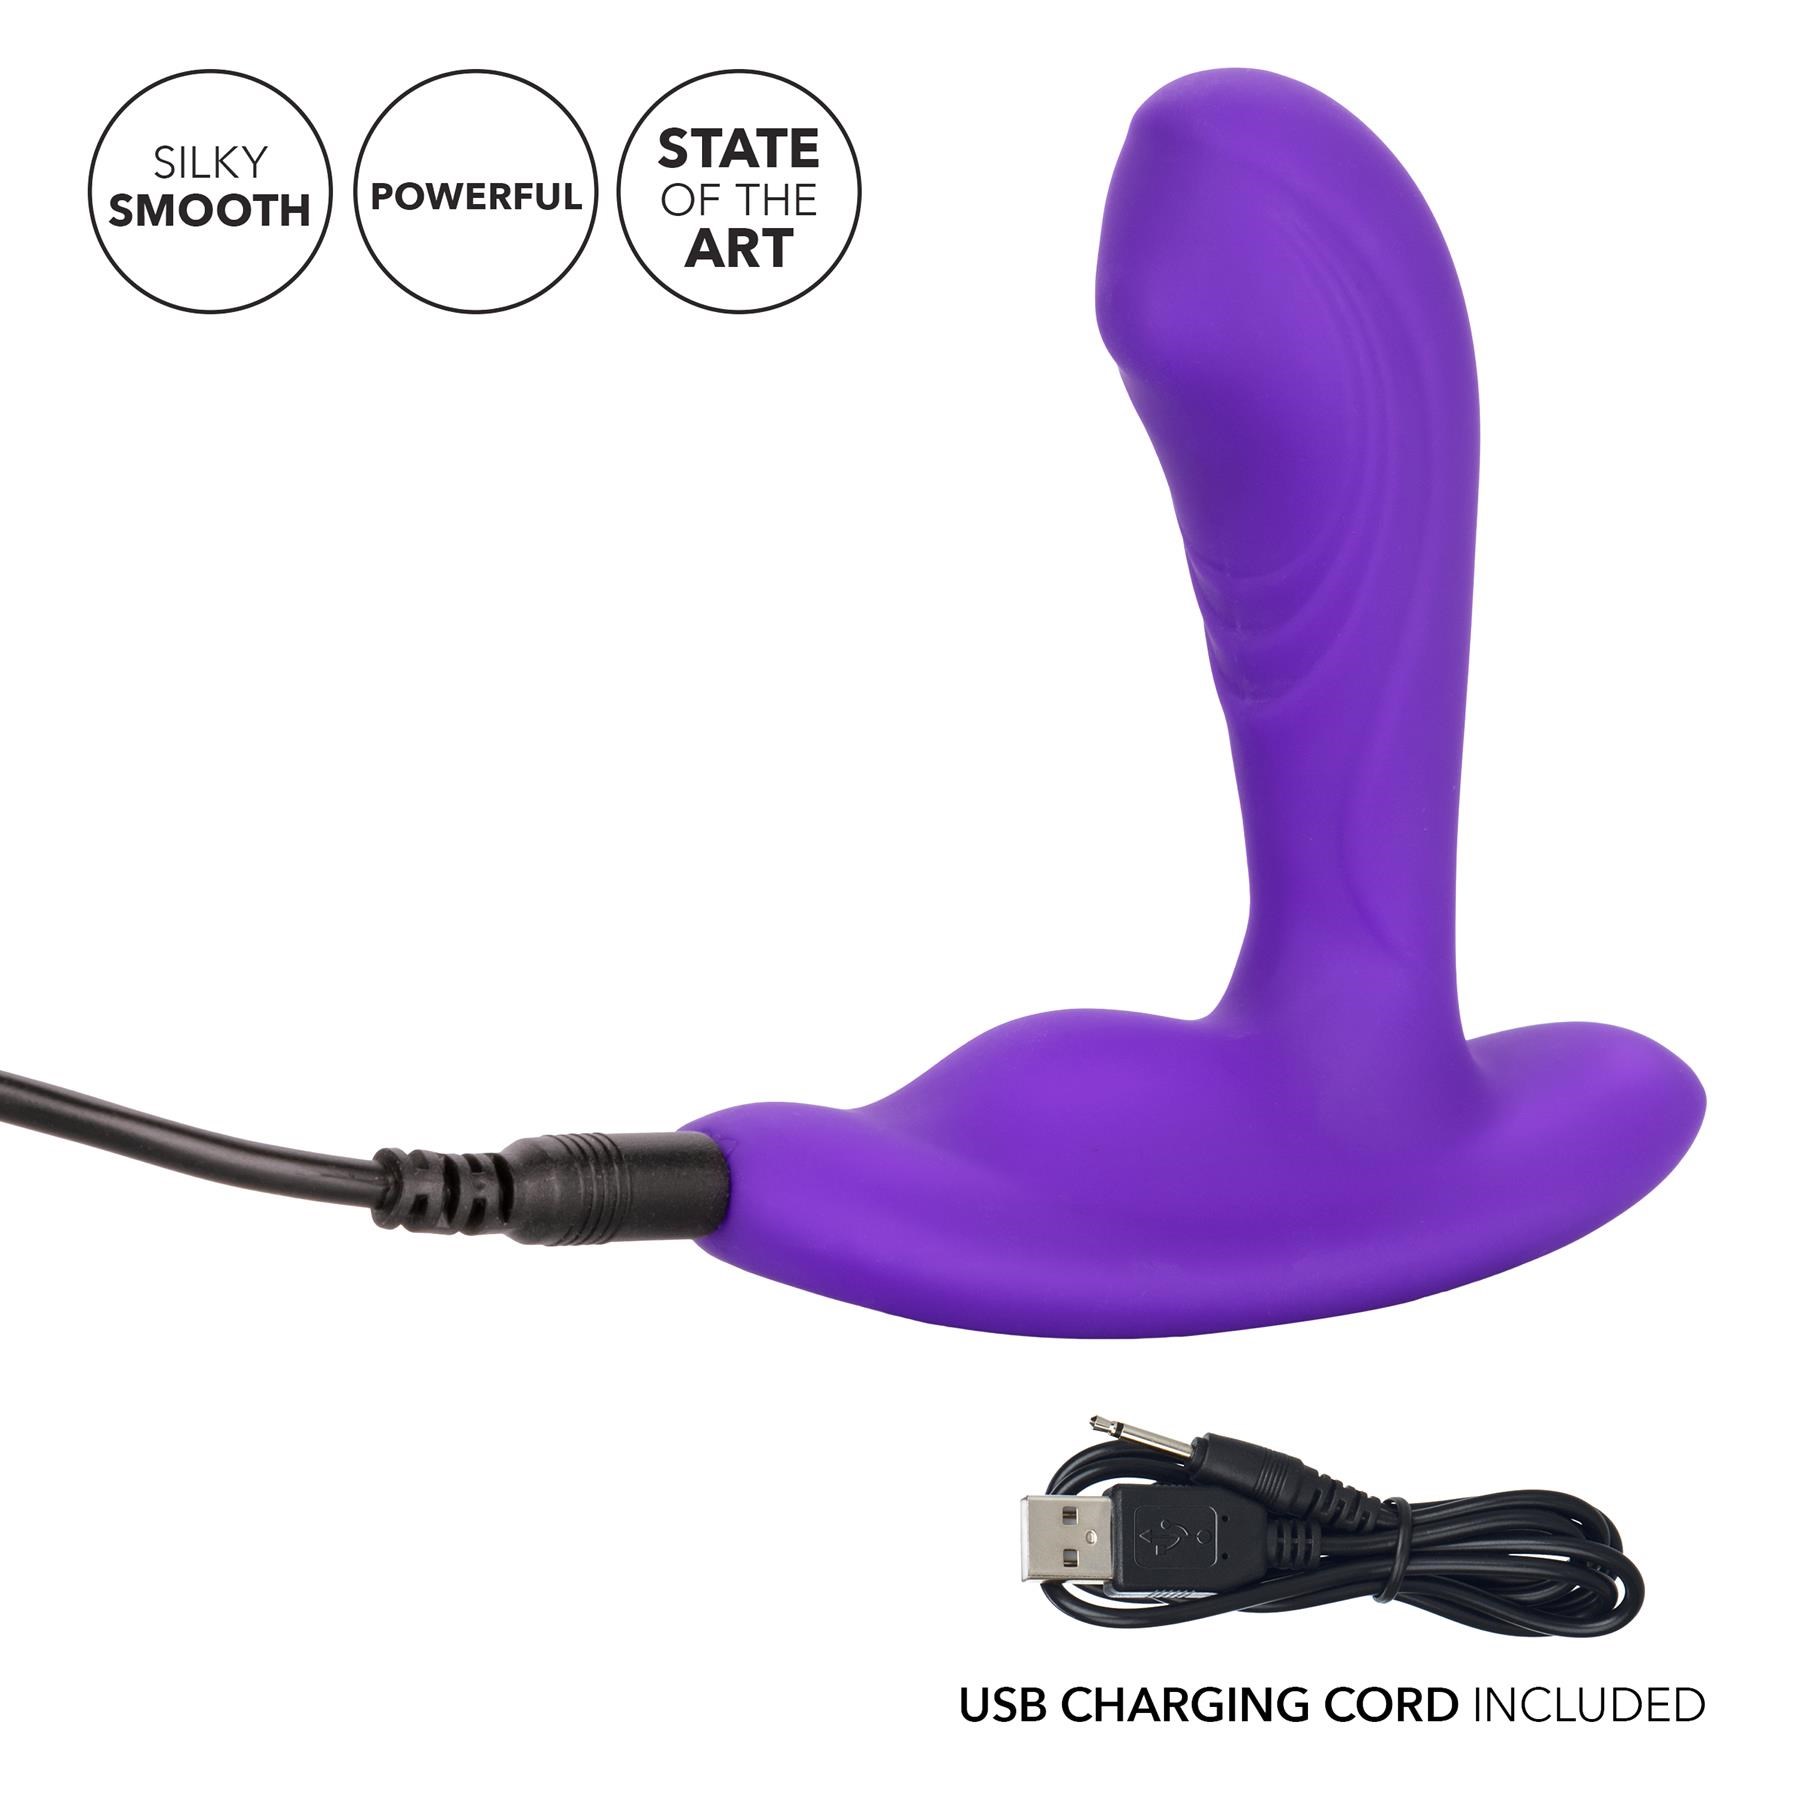 Silicone Remote Pinpoint Pleaser - Vibrator Showing Where the Charging Cable is Placed